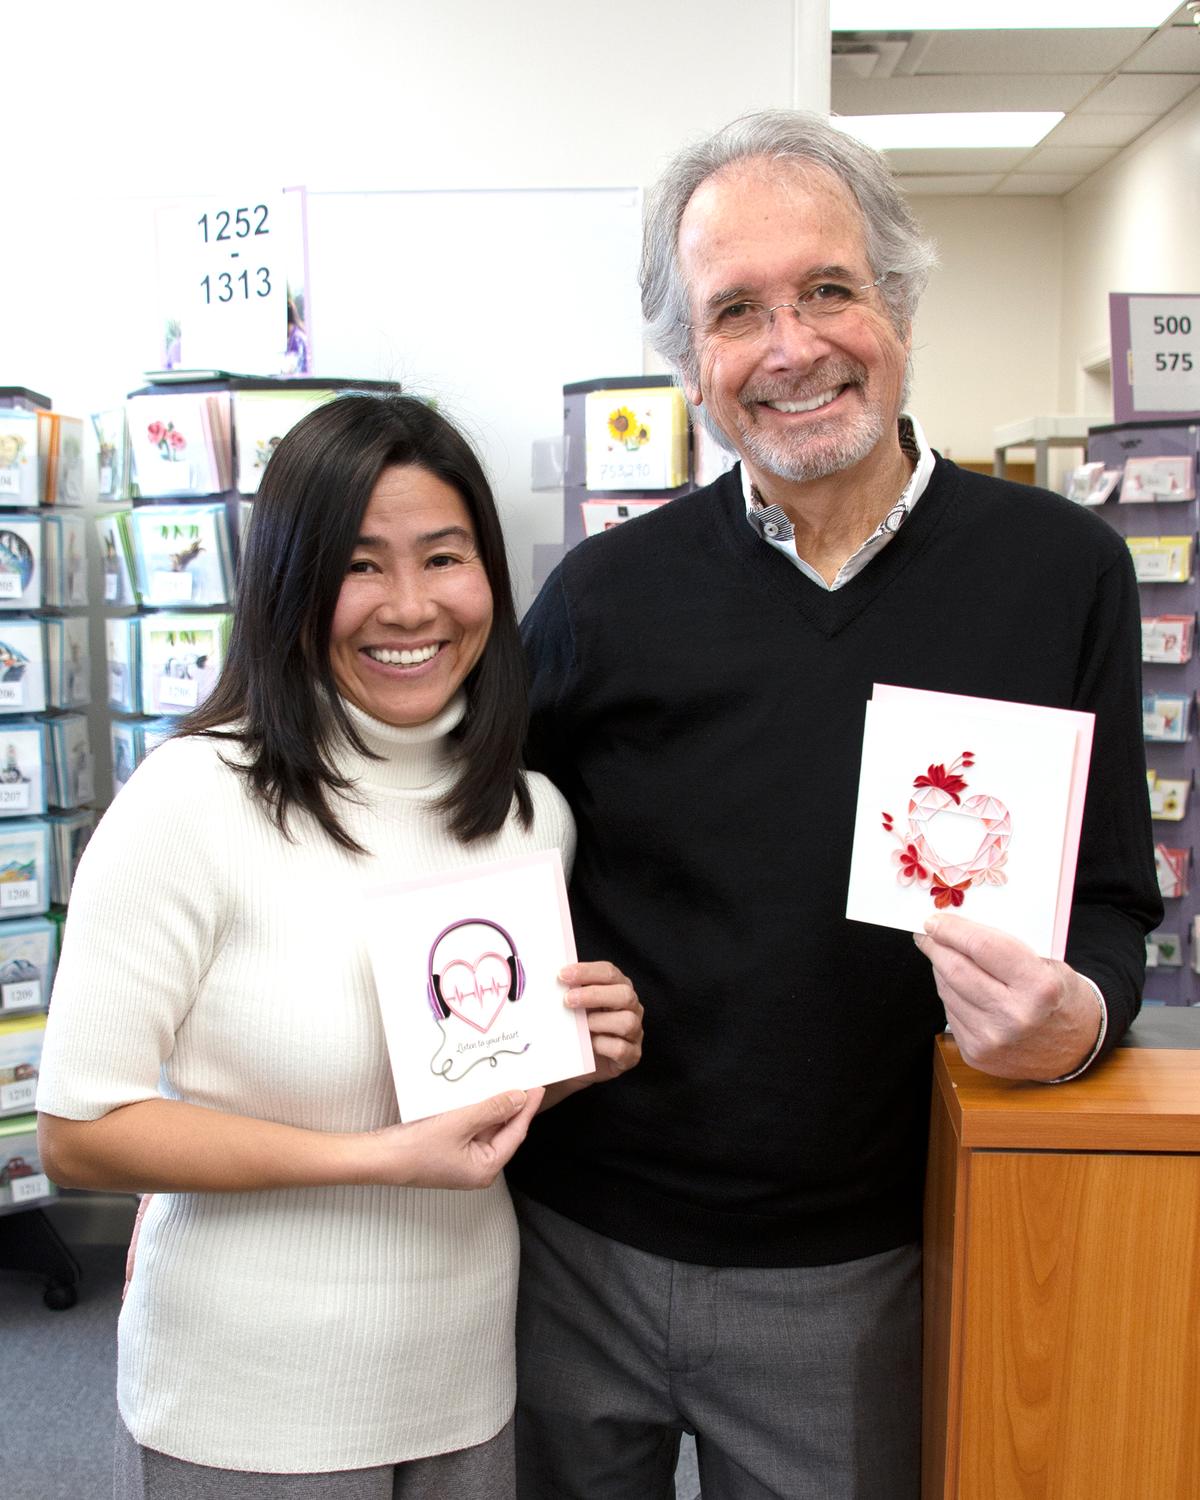 Huong Wolf (L) and her husband, Raphael, started Quilling Card in 2012. (Courtesy of Quilling Card)